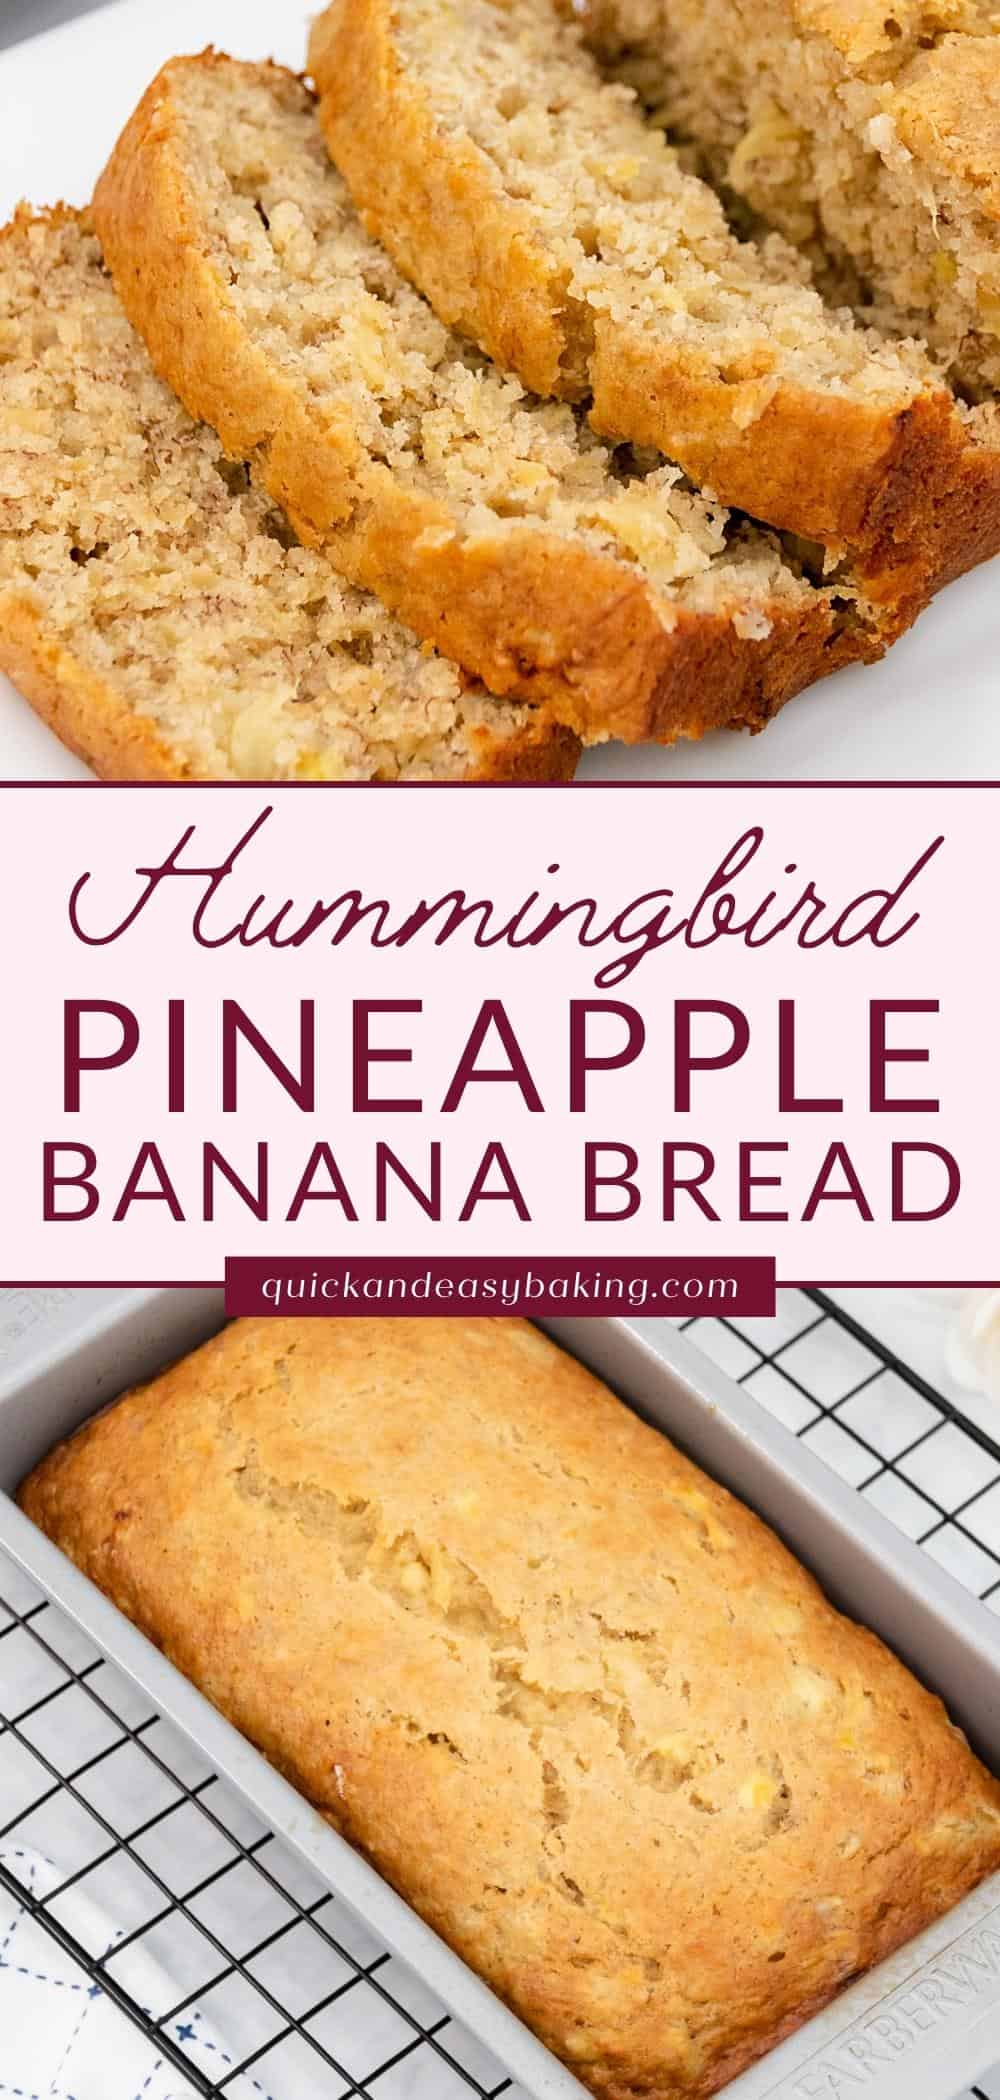 Pinterest collage of two images of banana pineapple bread with text overlay.